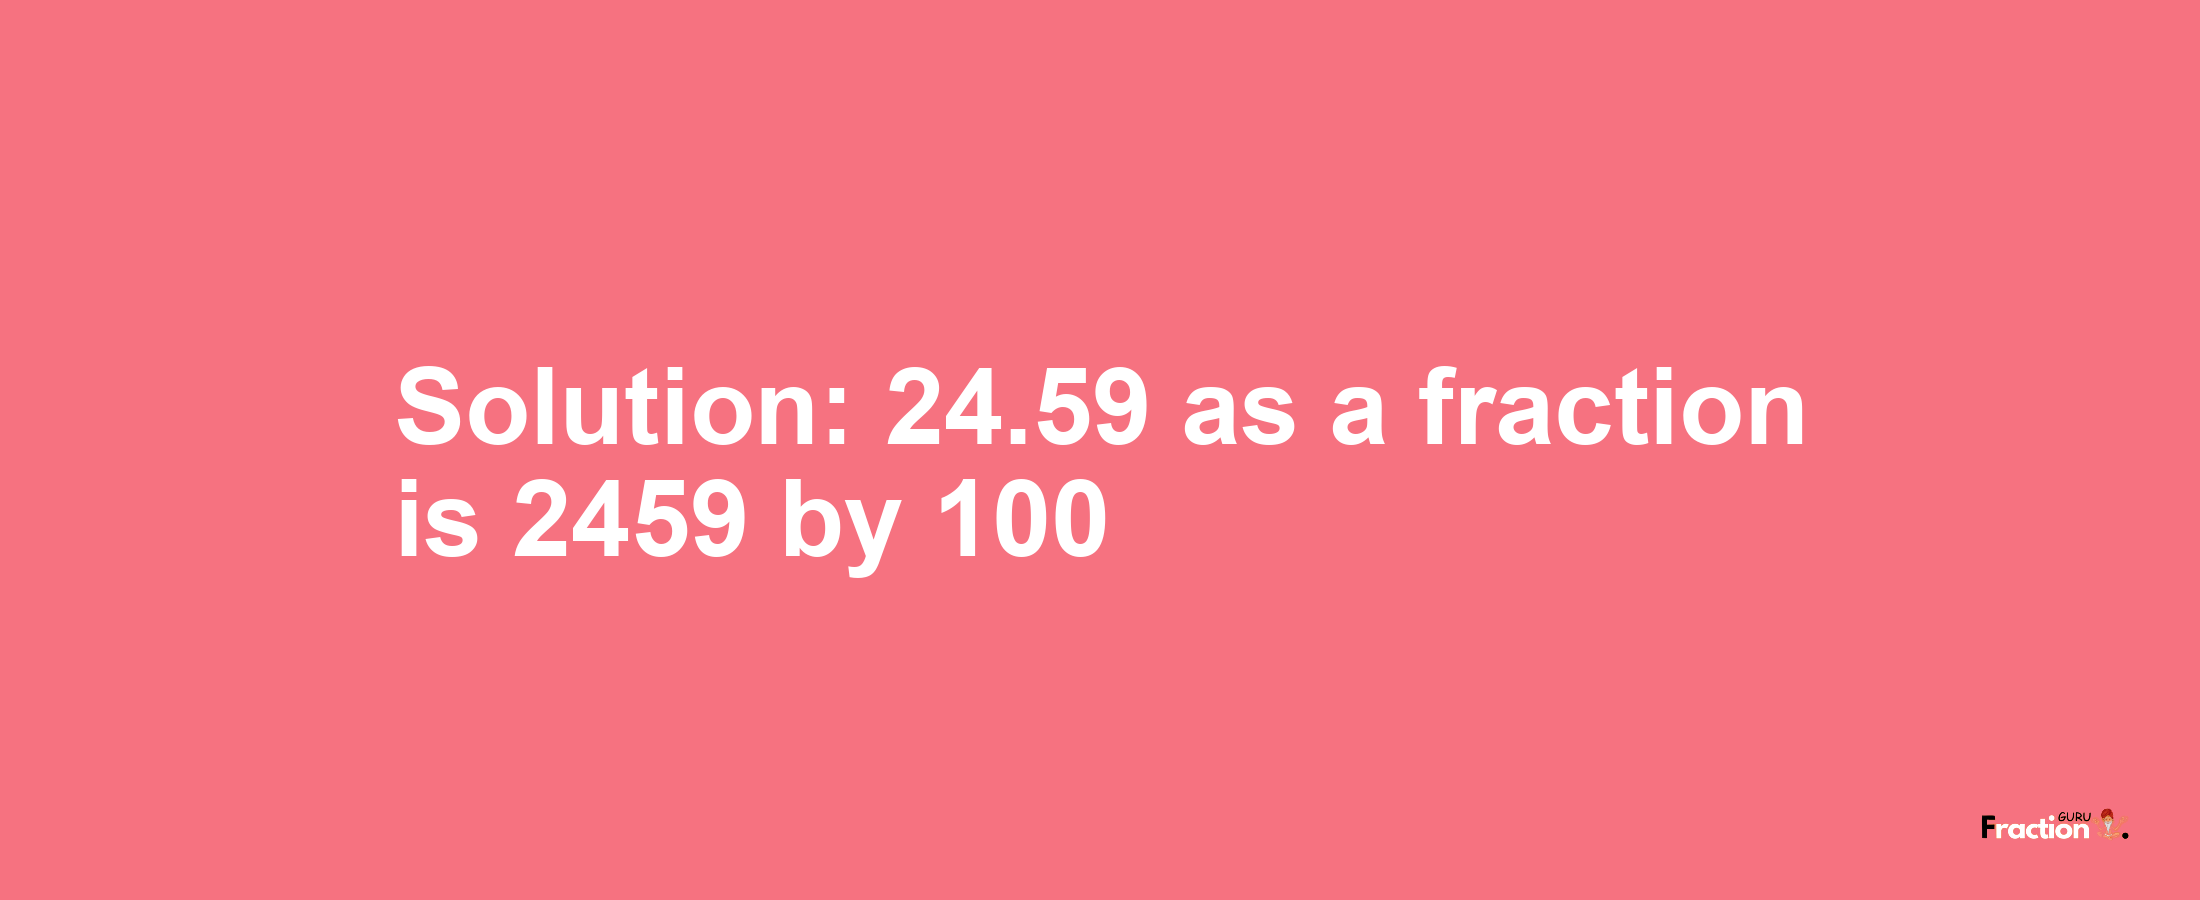 Solution:24.59 as a fraction is 2459/100